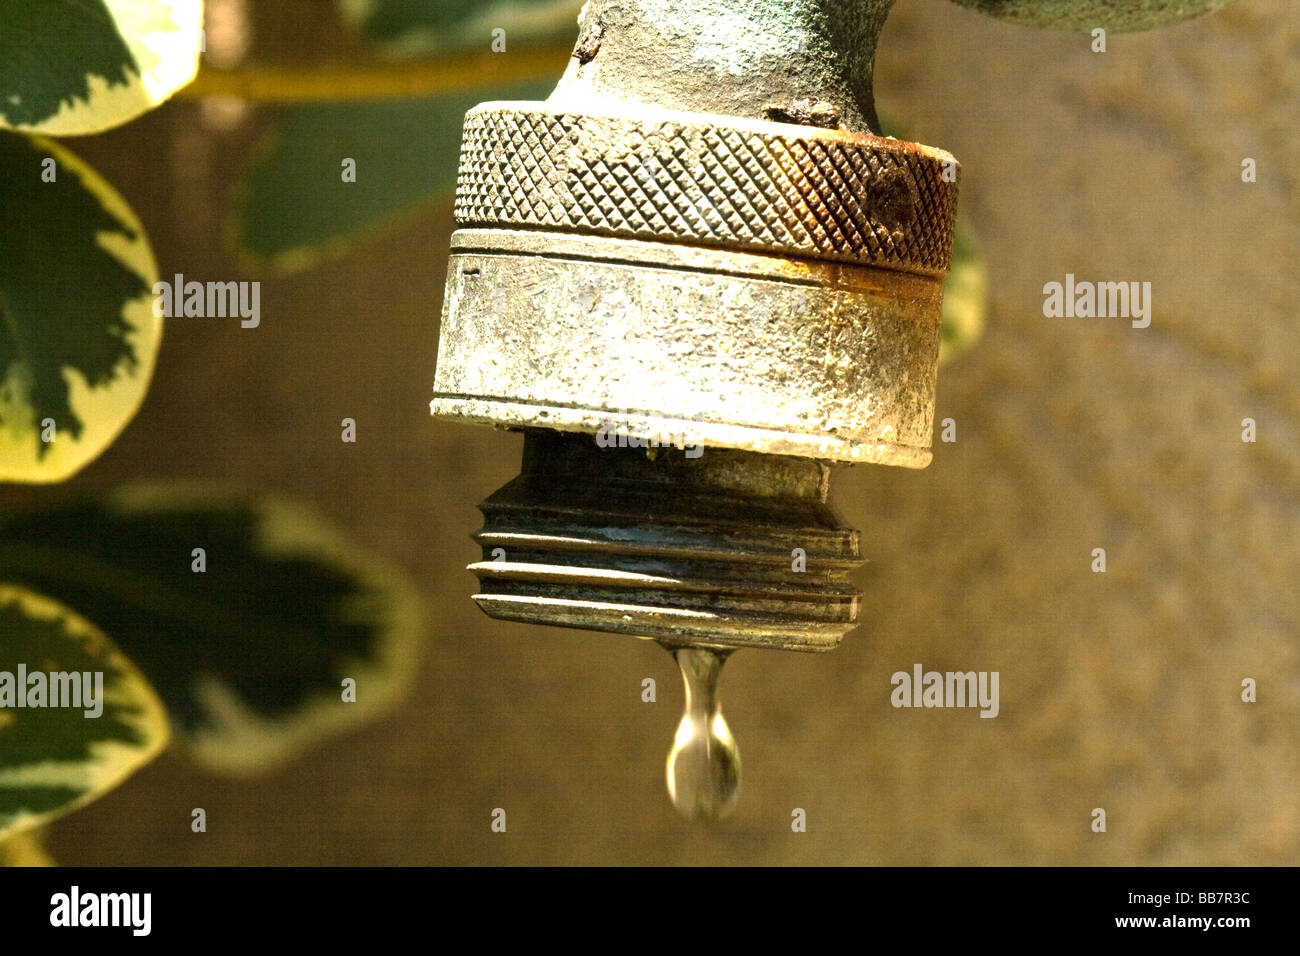 Single drop of water coming out of a metal outdoor spigot Stock Photo